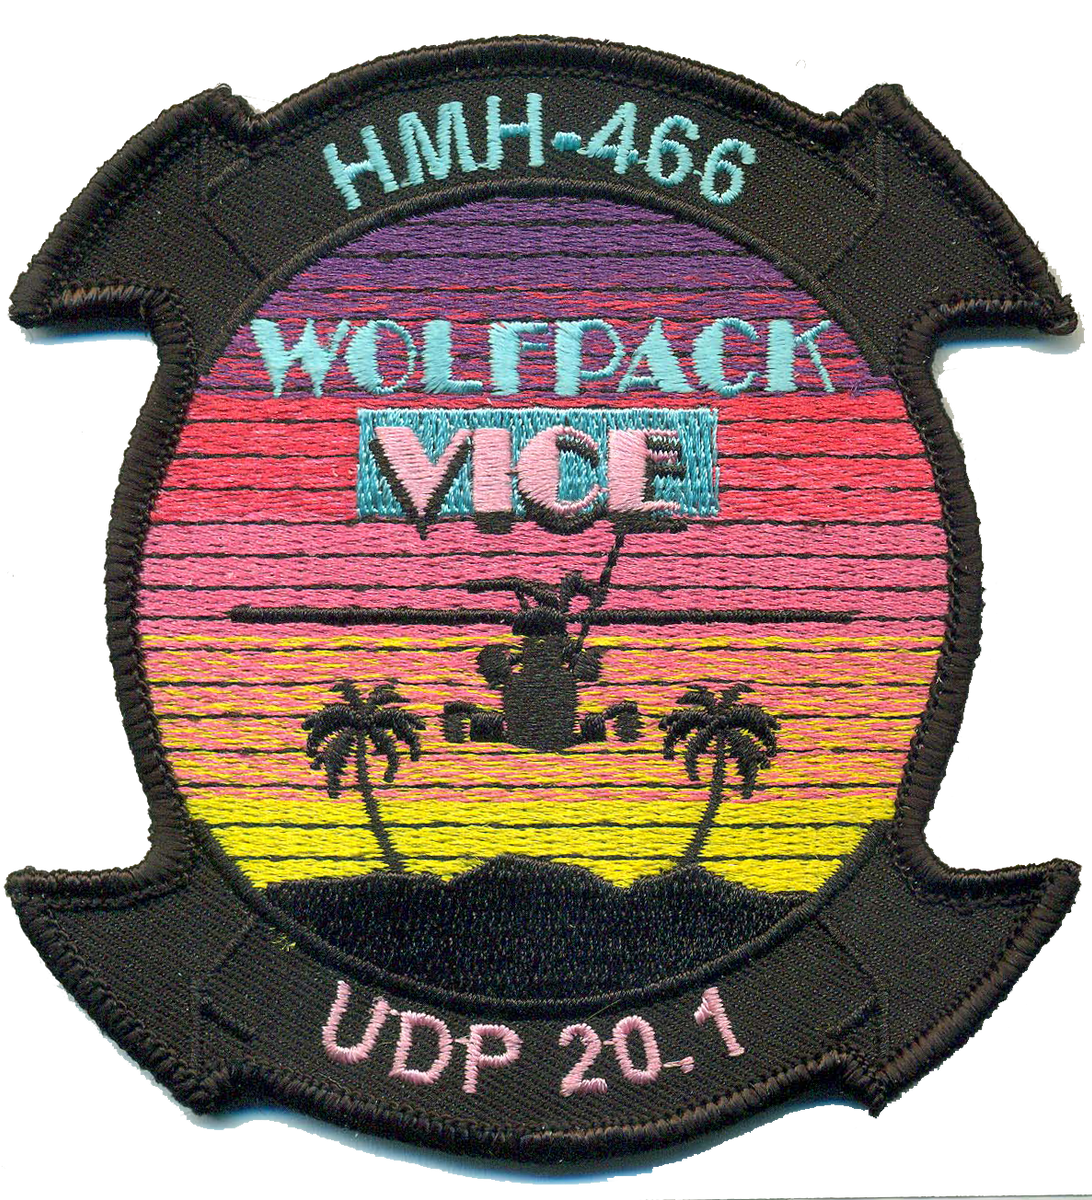 Hmh-466 Wolfpack 3 Wolves Patch \u2013 Sew On